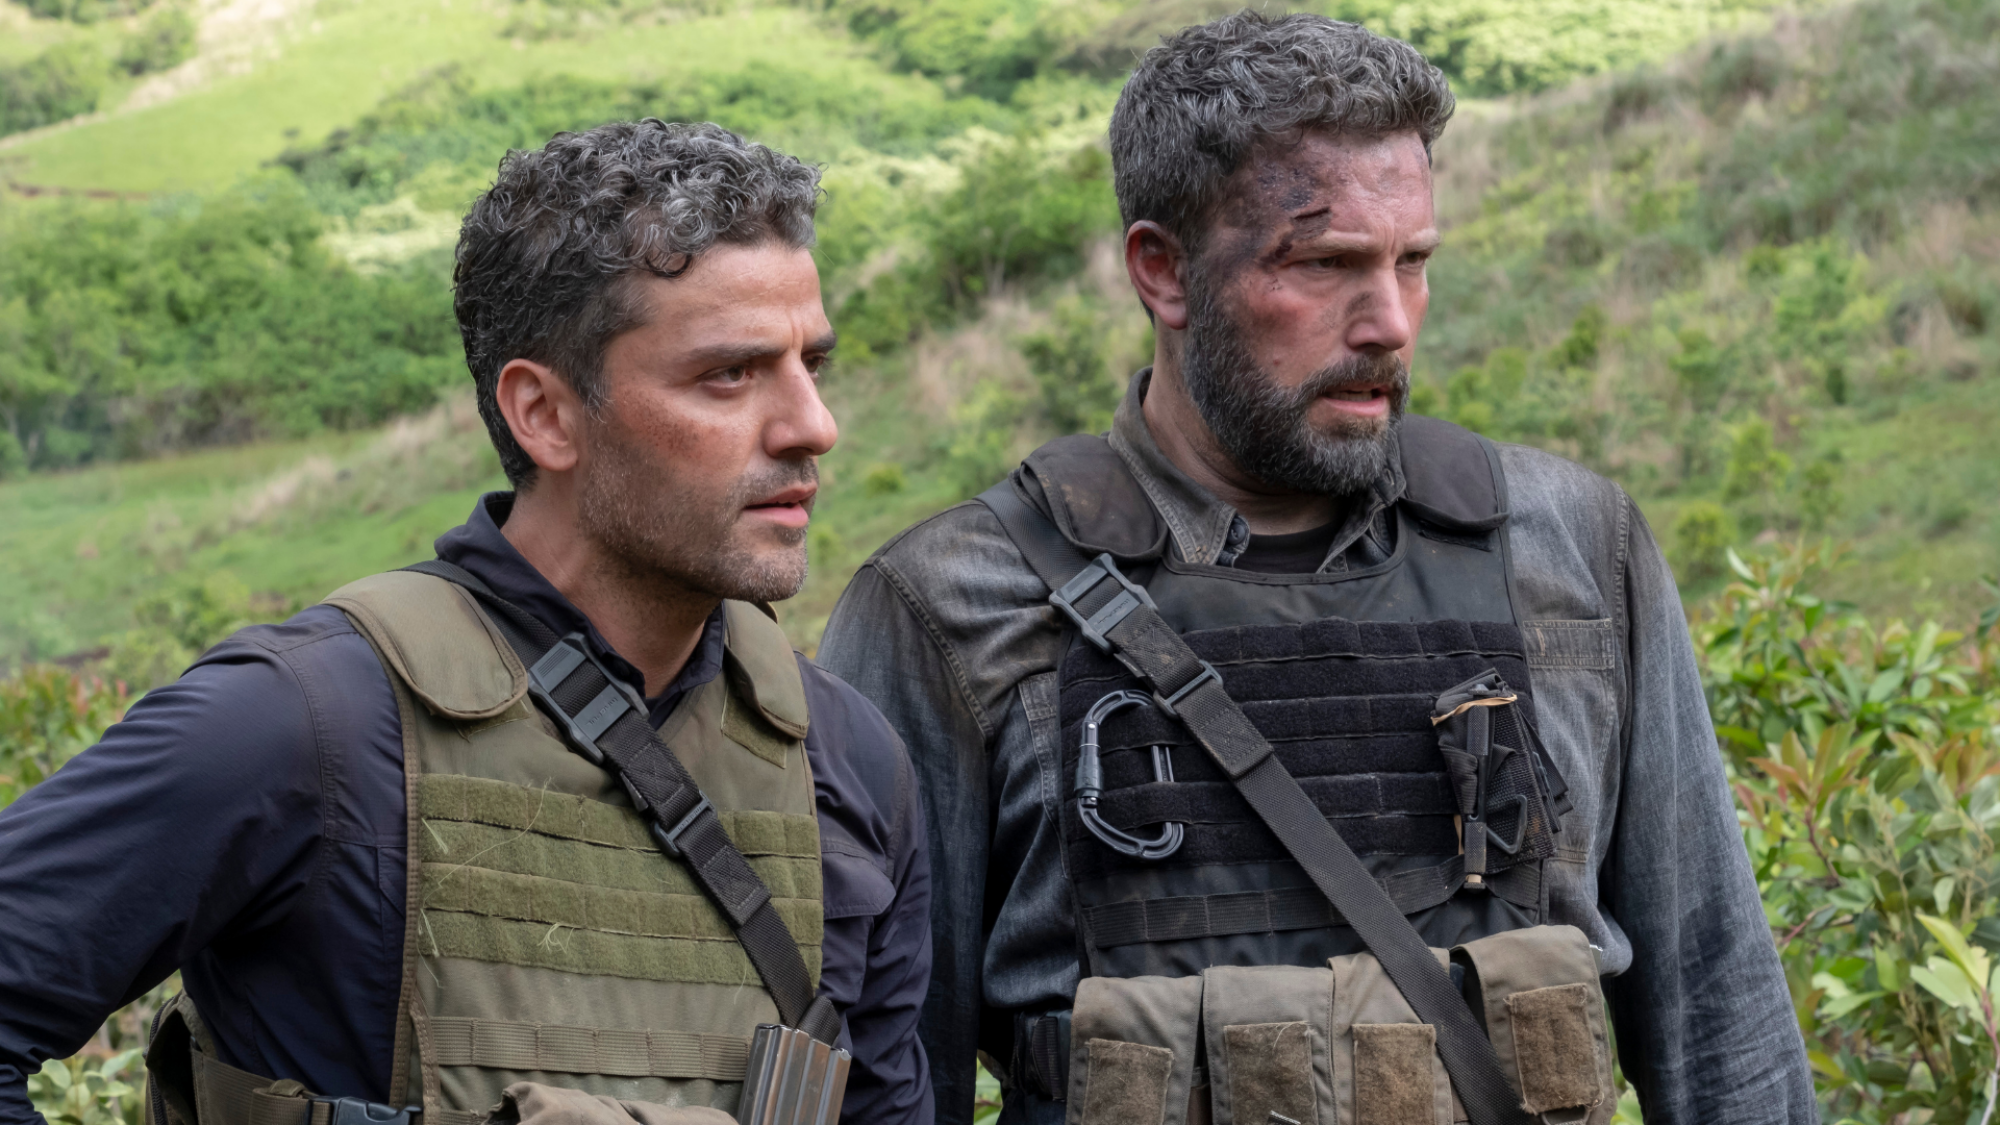 Oscar Isaac and Ben Affleck in a scene from "Triple Frontier"